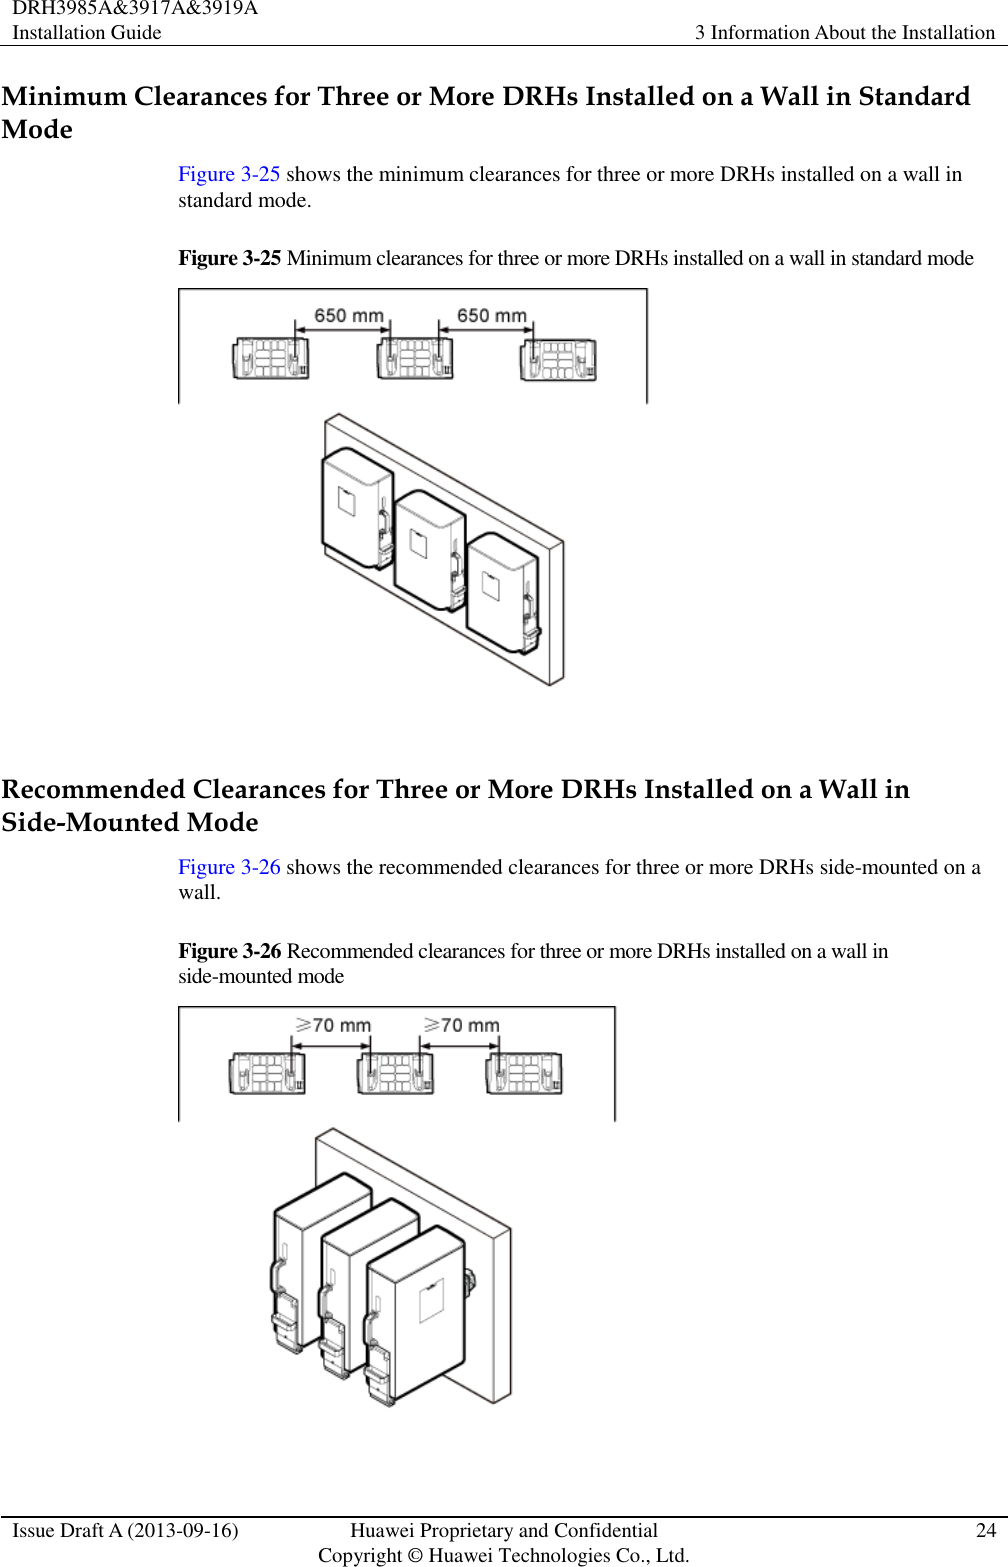 DRH3985A&amp;3917A&amp;3919A Installation Guide 3 Information About the Installation  Issue Draft A (2013-09-16) Huawei Proprietary and Confidential                                     Copyright © Huawei Technologies Co., Ltd. 24  Minimum Clearances for Three or More DRHs Installed on a Wall in Standard Mode Figure 3-25 shows the minimum clearances for three or more DRHs installed on a wall in standard mode. Figure 3-25 Minimum clearances for three or more DRHs installed on a wall in standard mode   Recommended Clearances for Three or More DRHs Installed on a Wall in Side-Mounted Mode Figure 3-26 shows the recommended clearances for three or more DRHs side-mounted on a wall.   Figure 3-26 Recommended clearances for three or more DRHs installed on a wall in side-mounted mode   